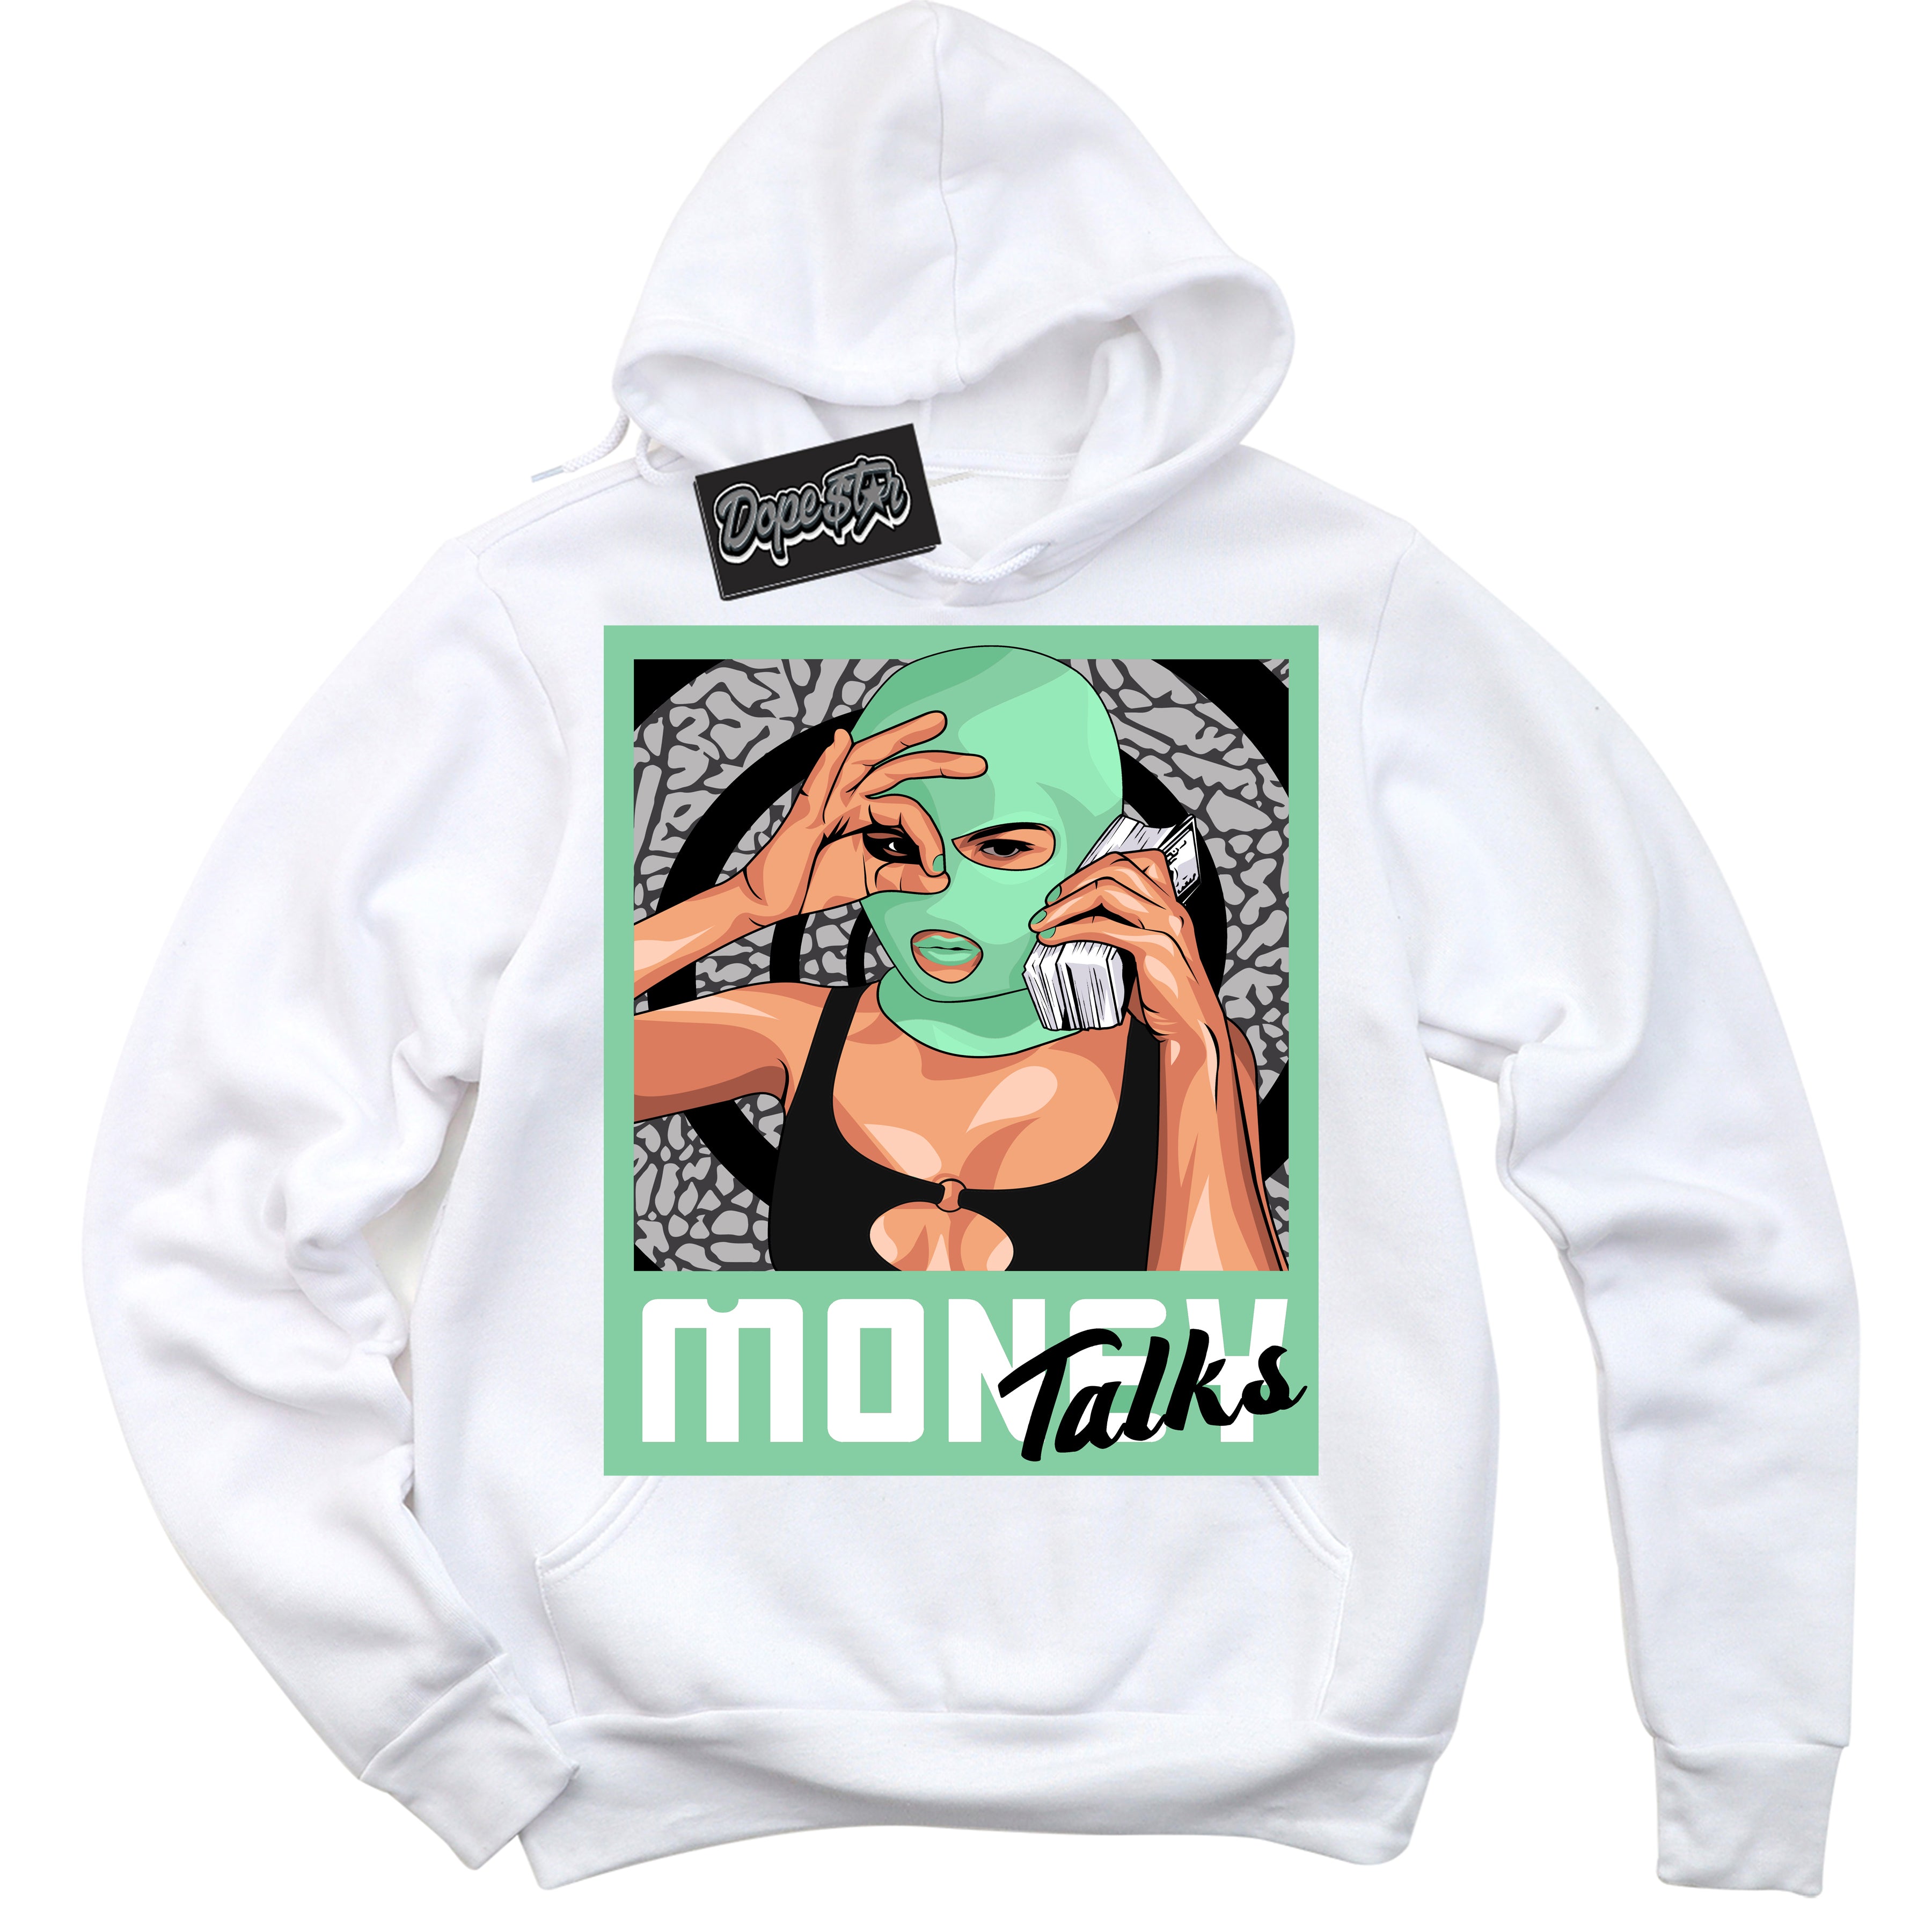 Cool White Graphic DopeStar Hoodie with “ Money Talks “ print, that perfectly matches Green Glow 3s sneakers